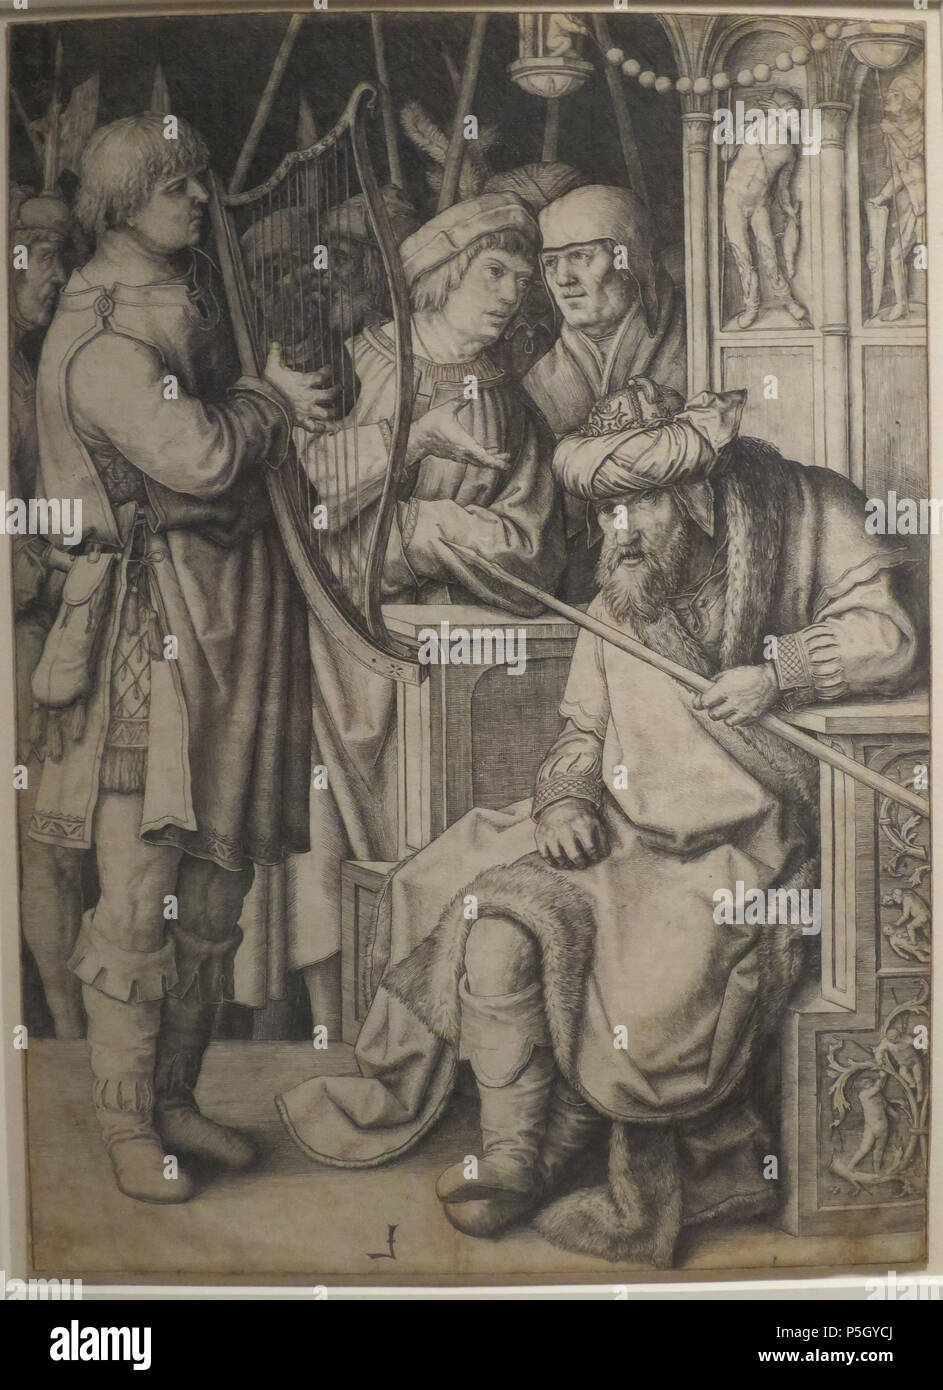 N/A. English: David Playing the Harp before Saul by Lucas van Leyden, copper engraving, c. 1508, Honolulu Museum of Art, accession 10607 . circa 1508.   Lucas van Leyden  (1494–1533)     Alternative names Lucas van Leiden, Lucas van Leijden, Lucas Hugensz. van Leyden, Luca d'Olanda, Lucas Iacobsz., Lucas Jacobsz.  Description Dutch painter, draughtsman, engraver and wood carver  Date of birth/death 1494 8 August 1533  Location of birth/death Leiden Leiden  Work period circa 1508-1533  Work location Leiden  Authority control  : Q320980 VIAF:95809141 ISNI:0000 0003 5543 7835 ULAN:500020789 LCCN: Stock Photo